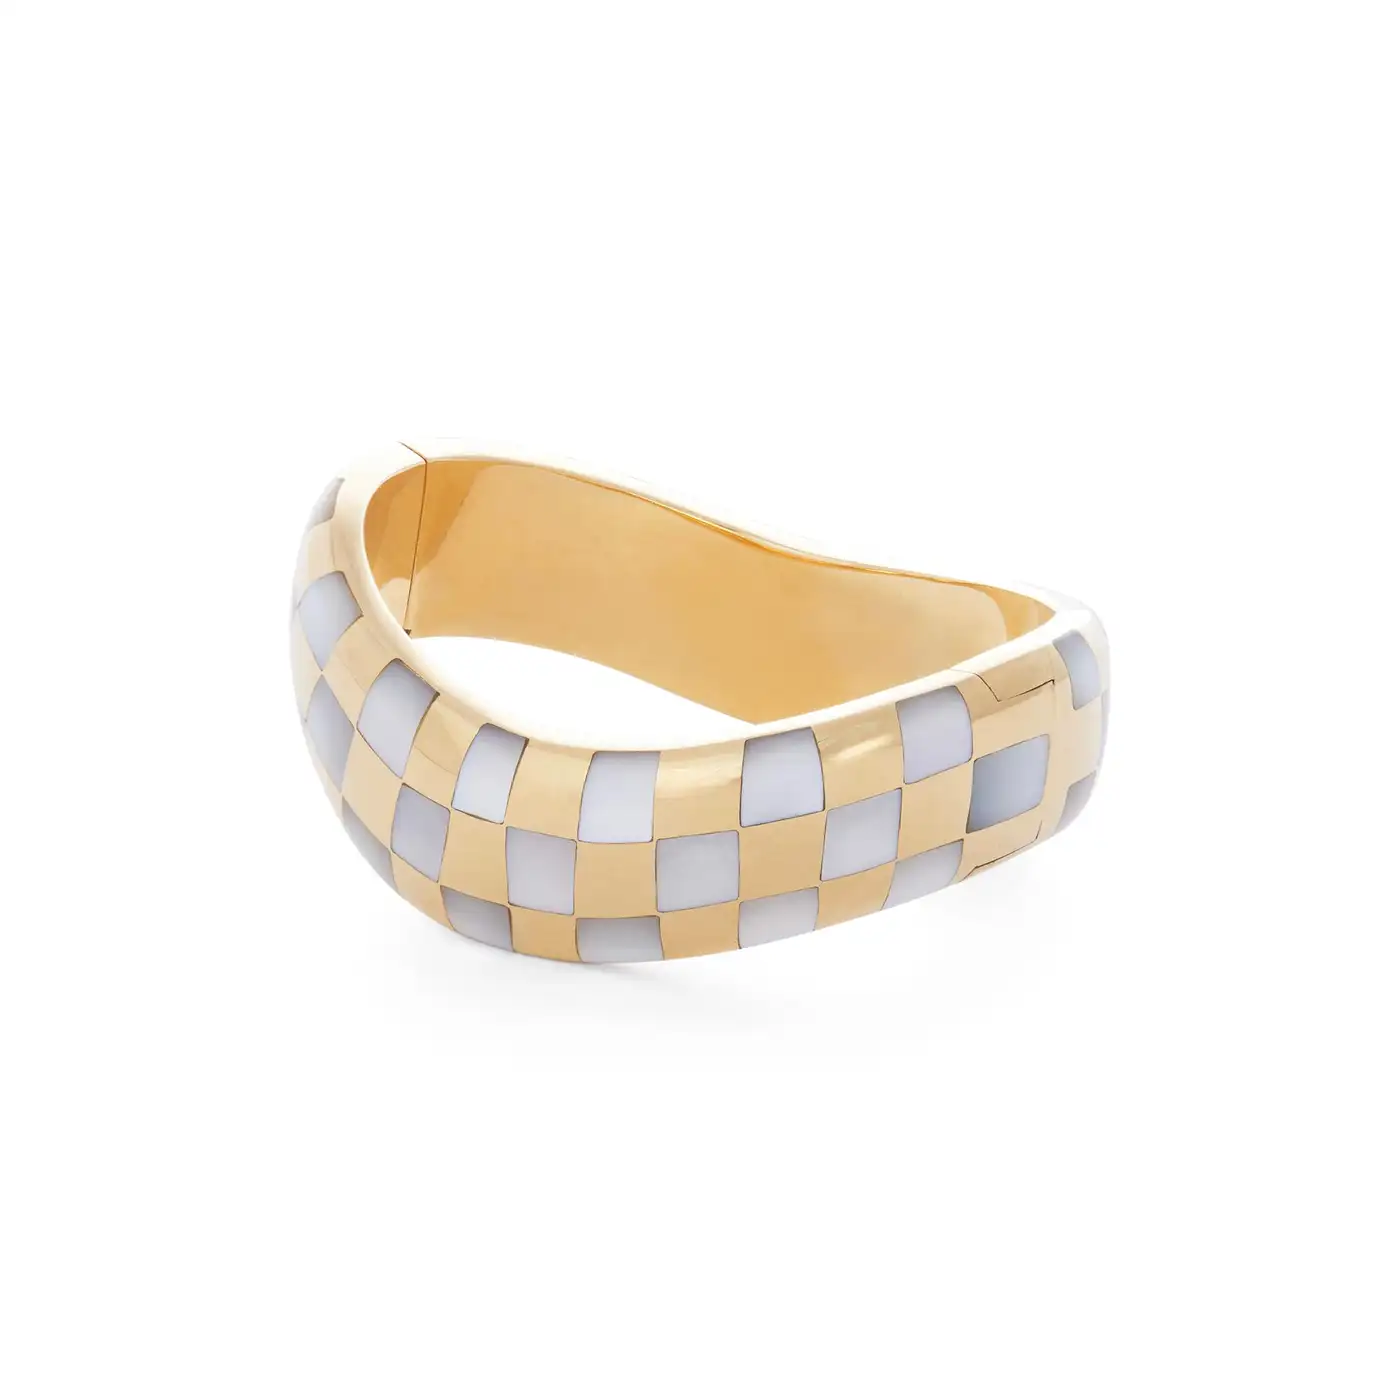 Angela-Cummings-Gold-and-Mother-or-Pearl-Bangle-9.webp